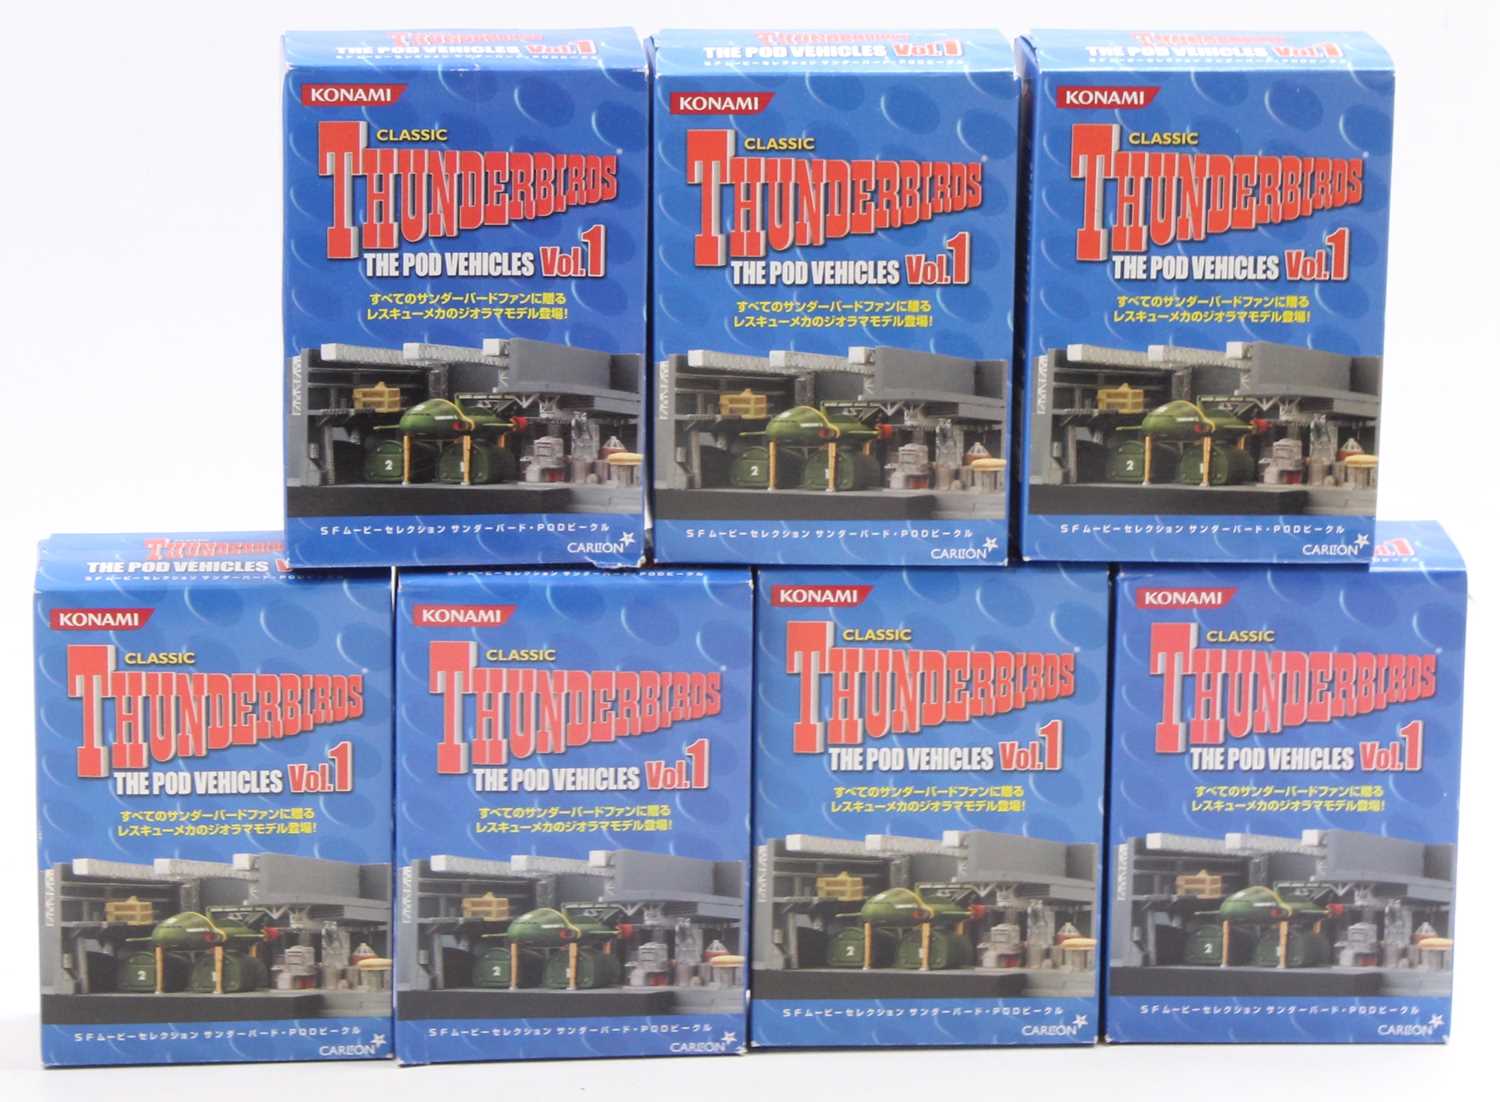 A collection of Carlton/Konami Classic Thunderbirds Vol. 1 Pod Vehicles gift set, all housed in